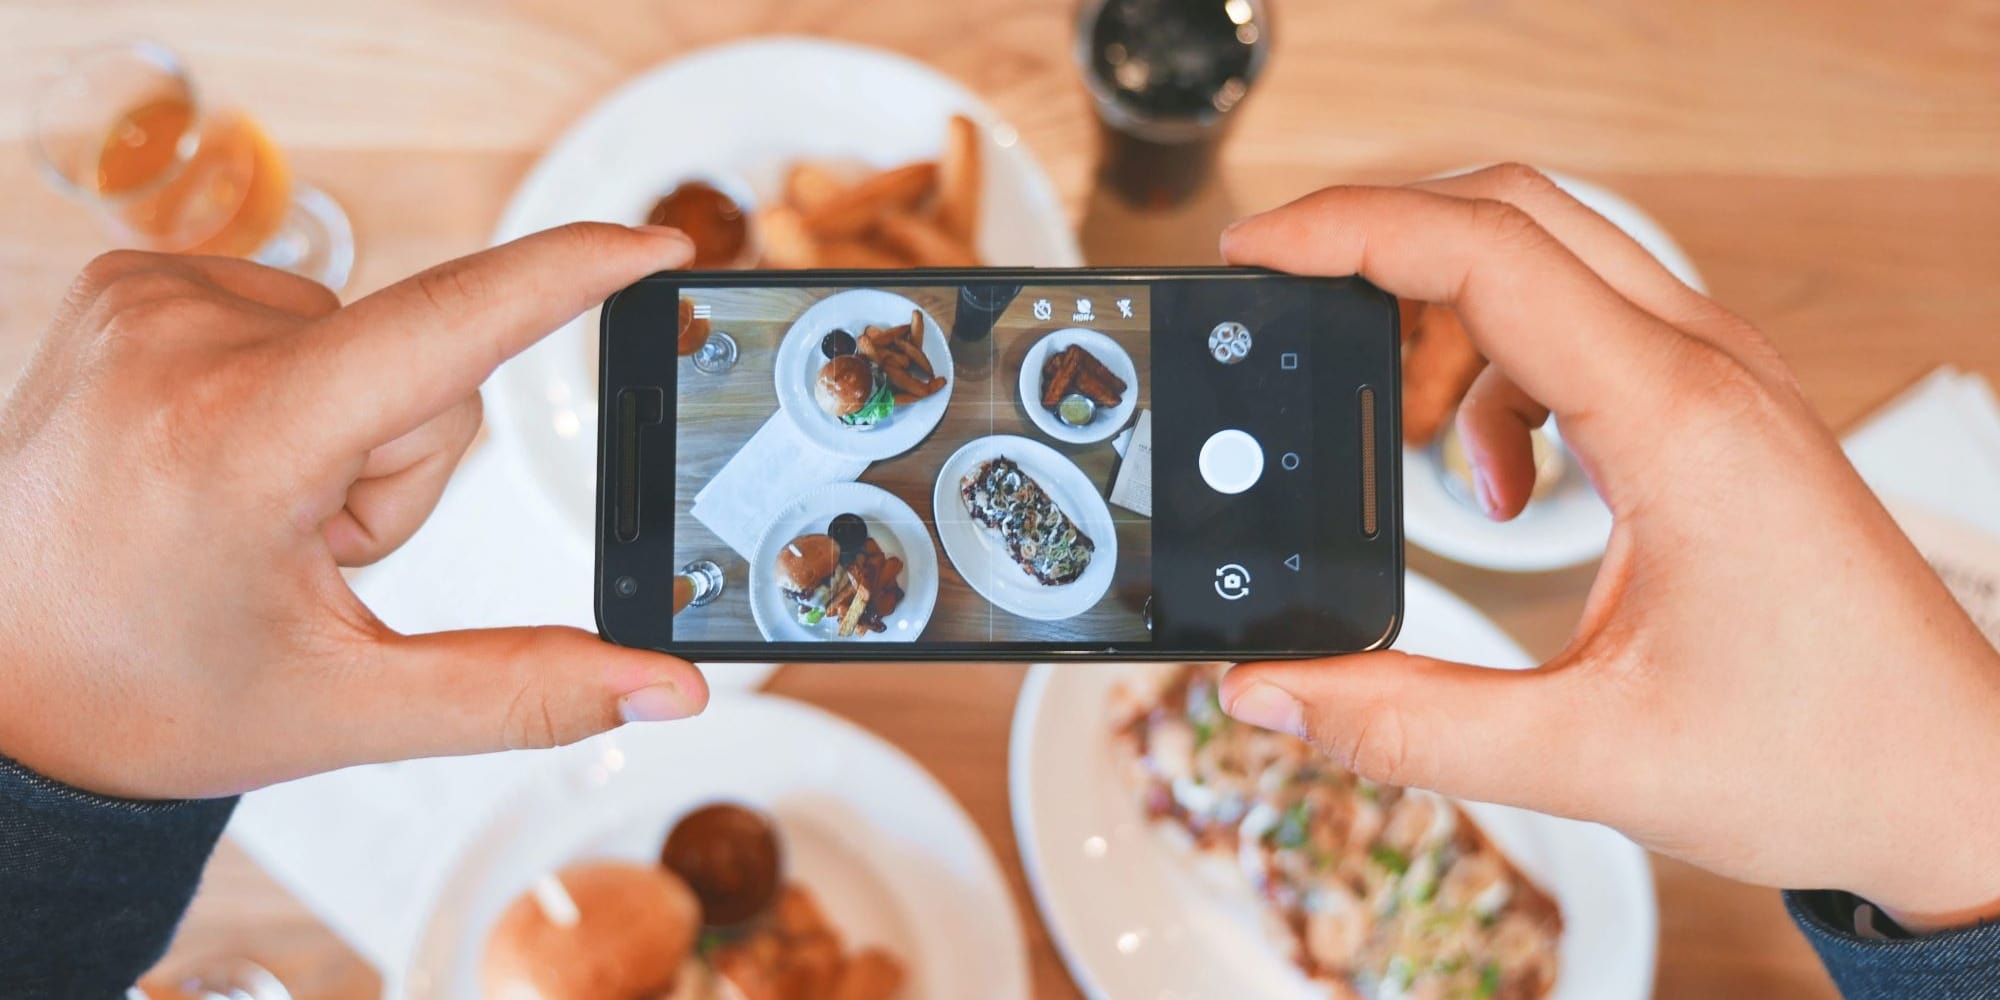 user-generated content example of a person photographing their food